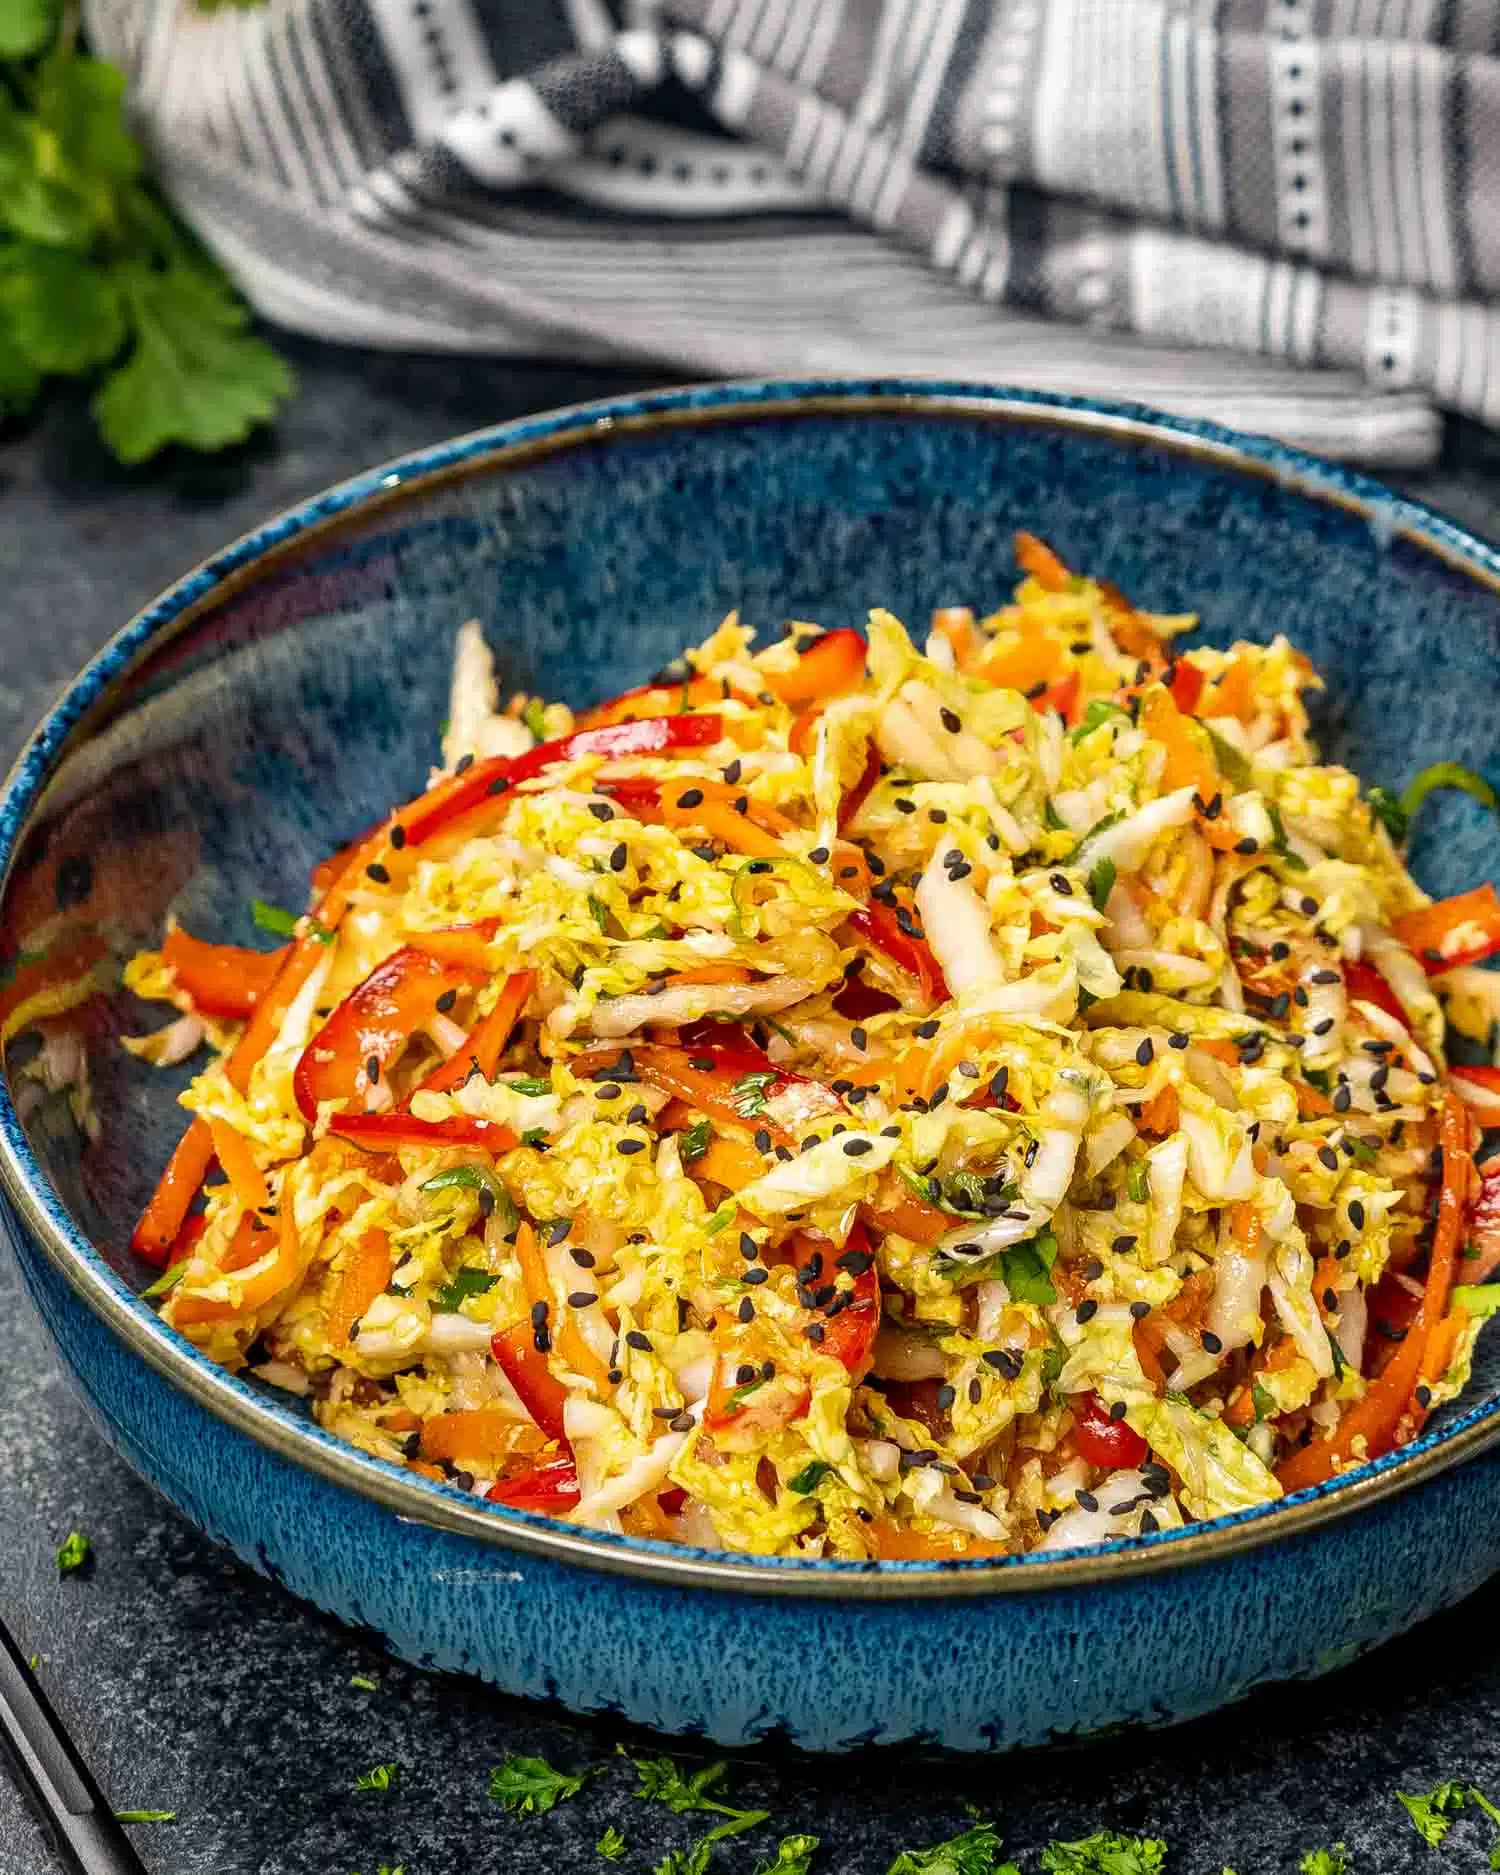 asian style slaw in a blue bowl garnished with sesame seeds.